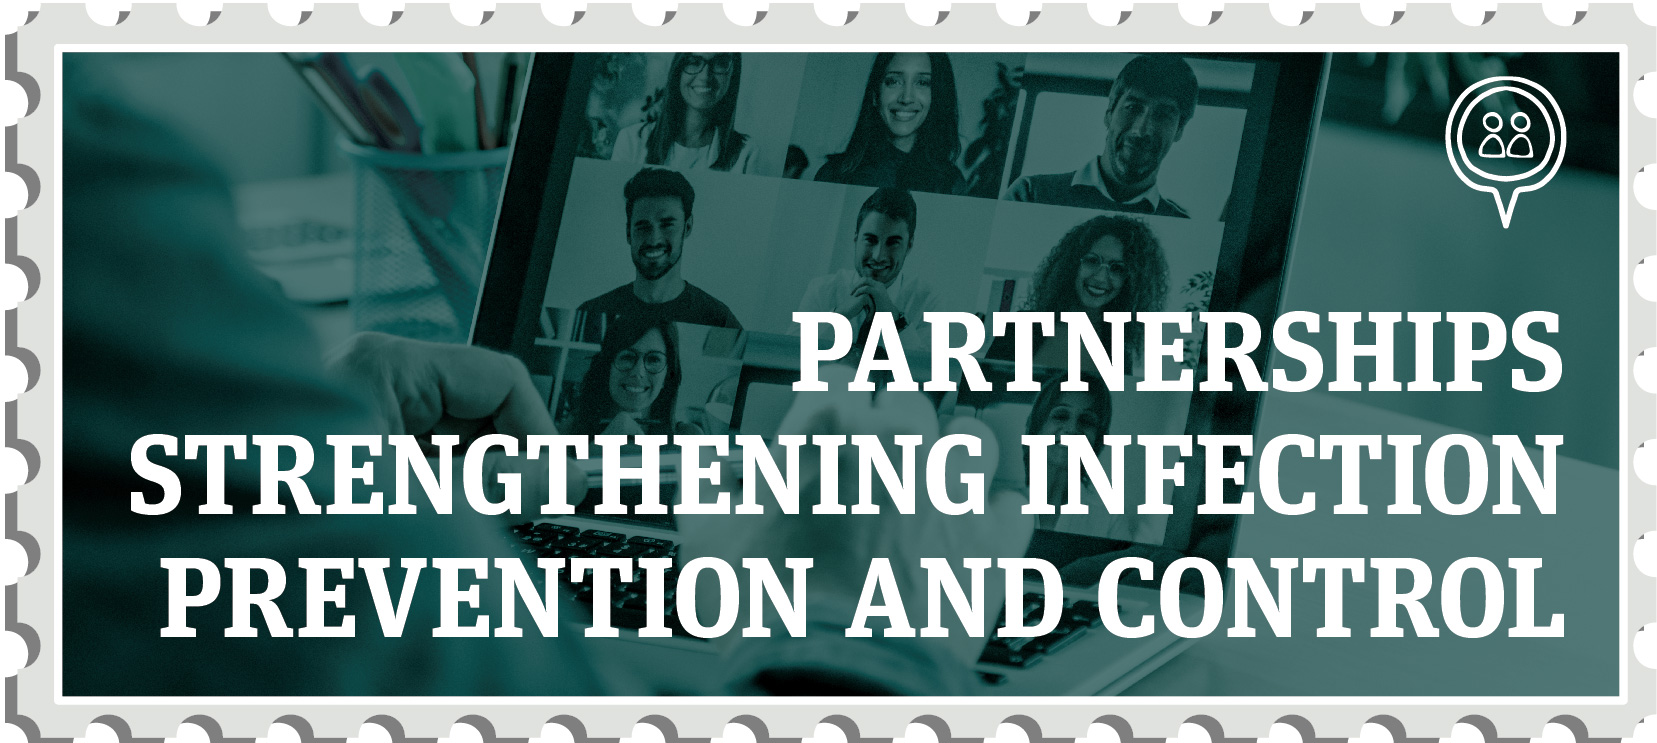 Partnerships strengthening infection prevention and control